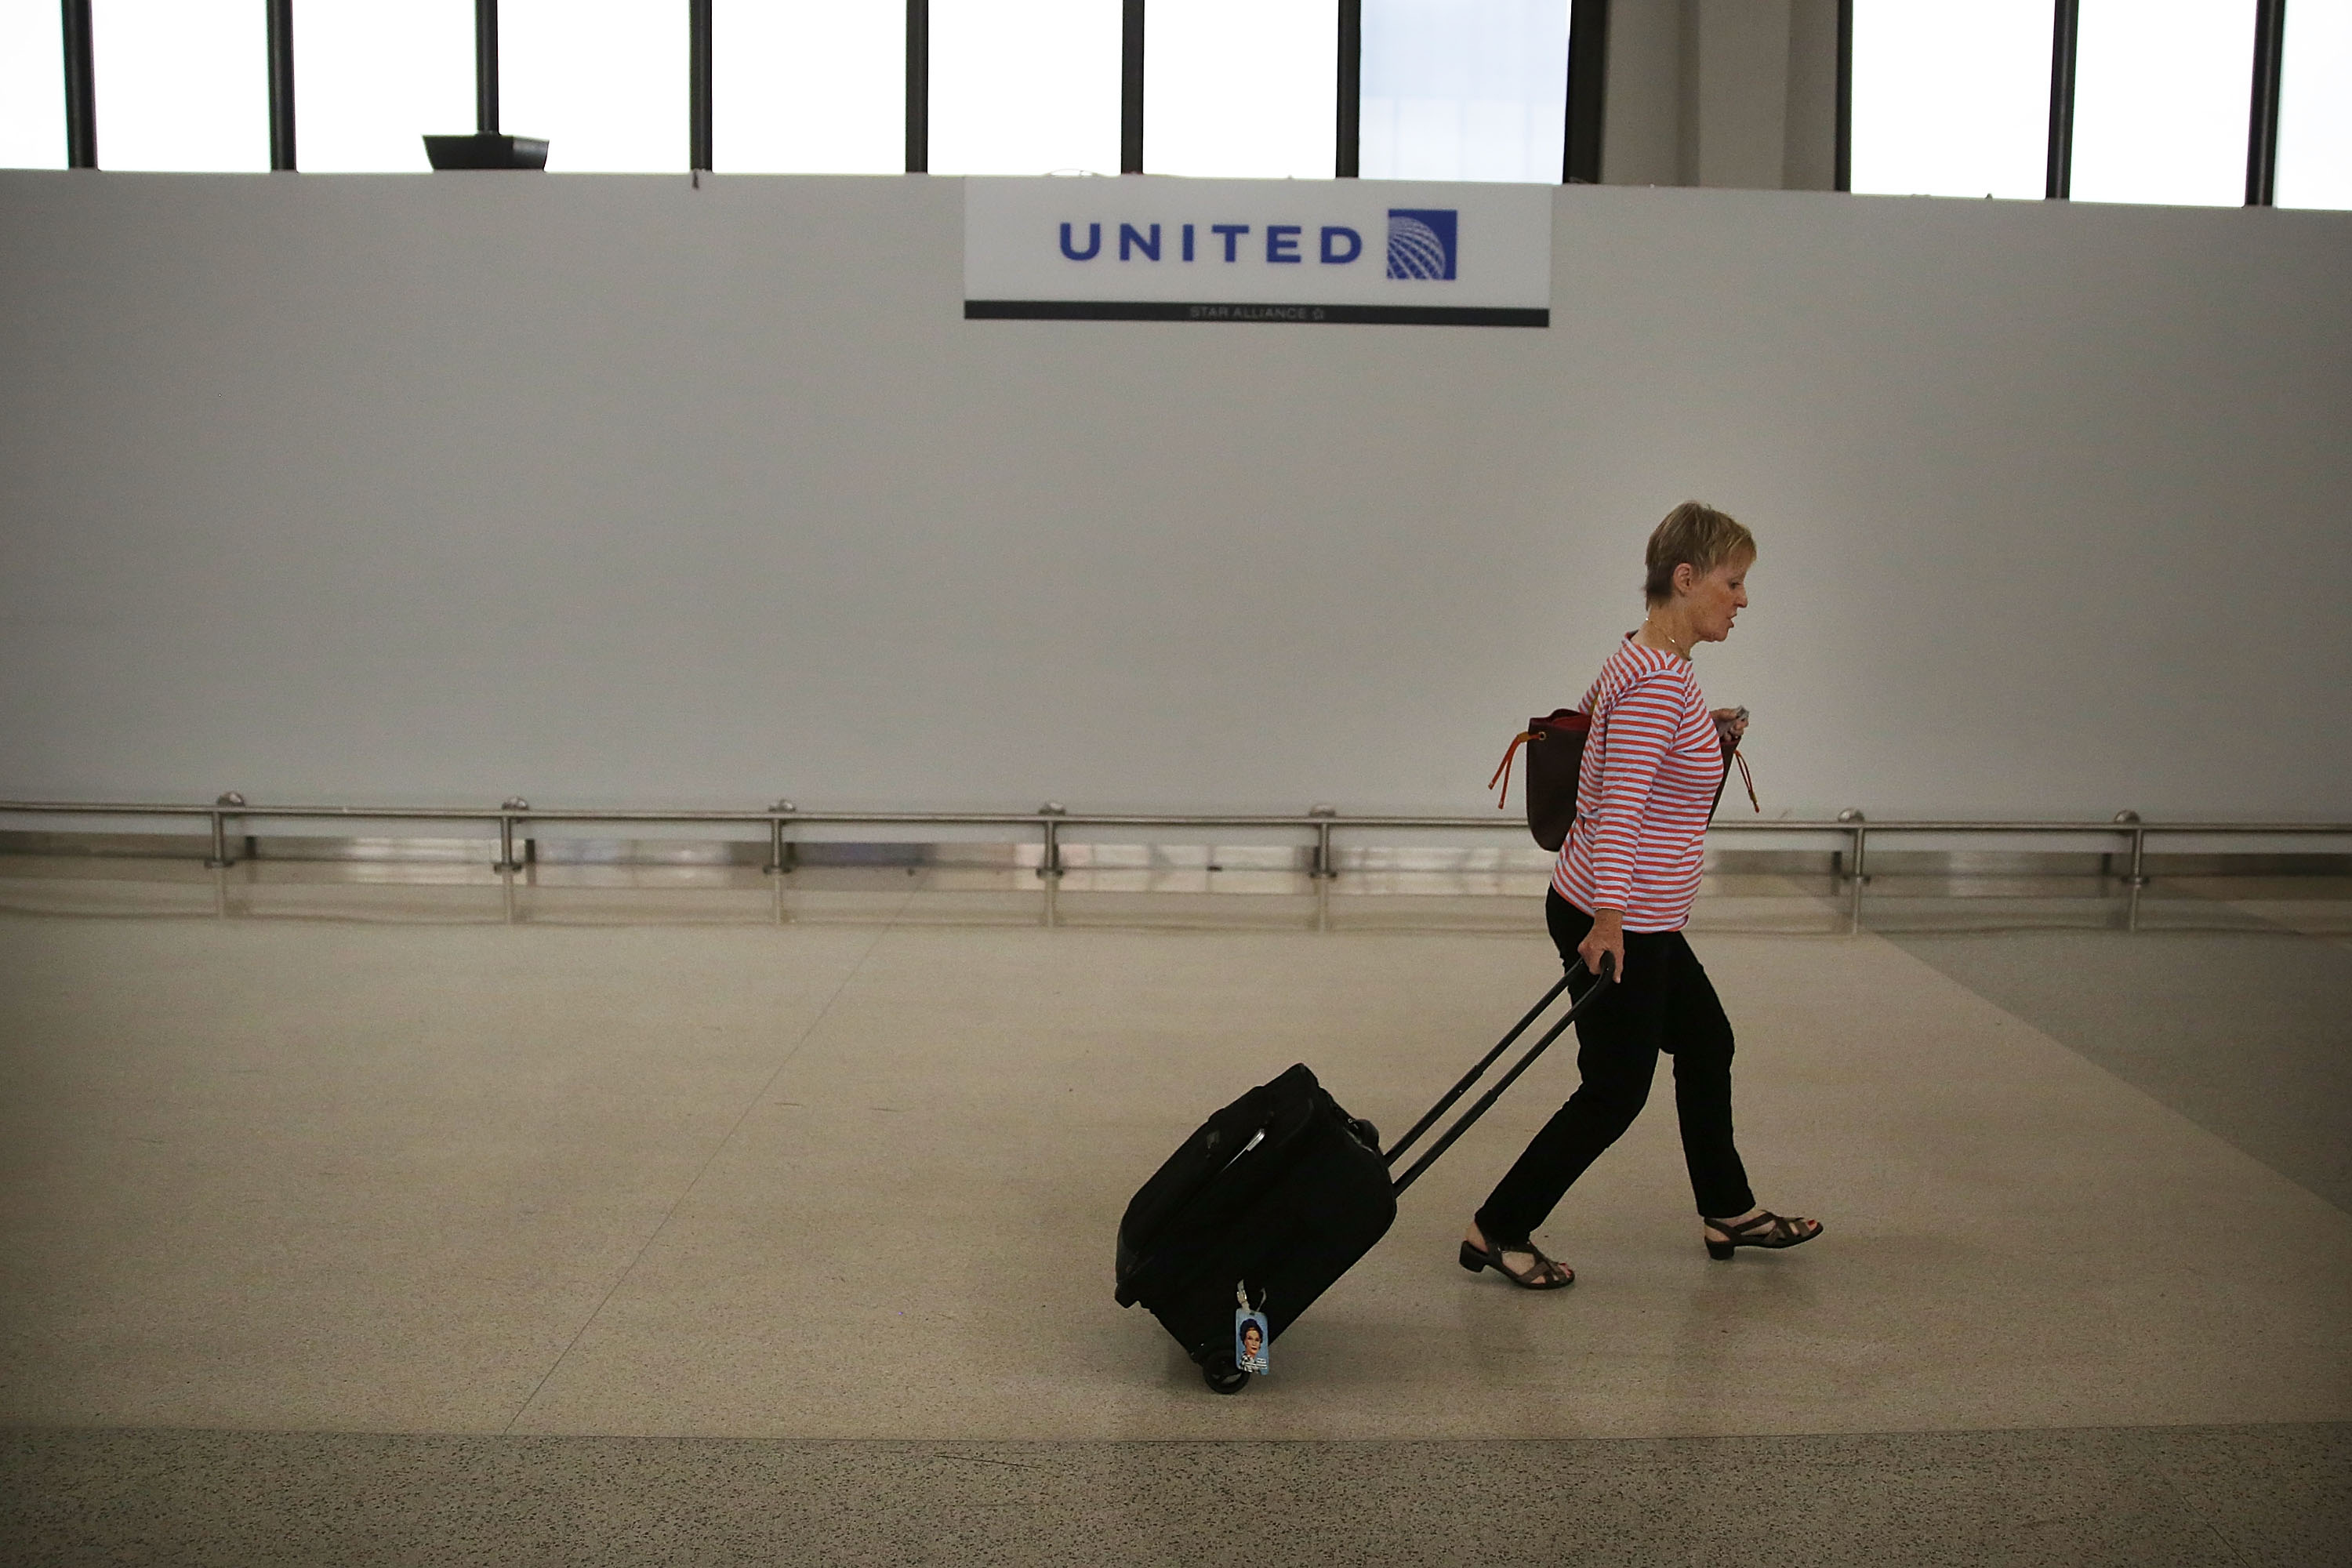 A traveler walks through the United Airlines terminal at Newark Liberty Airport on July 8, 2015 in Newark, New Jersey. (Spencer Platt&mdash;Getty Images)